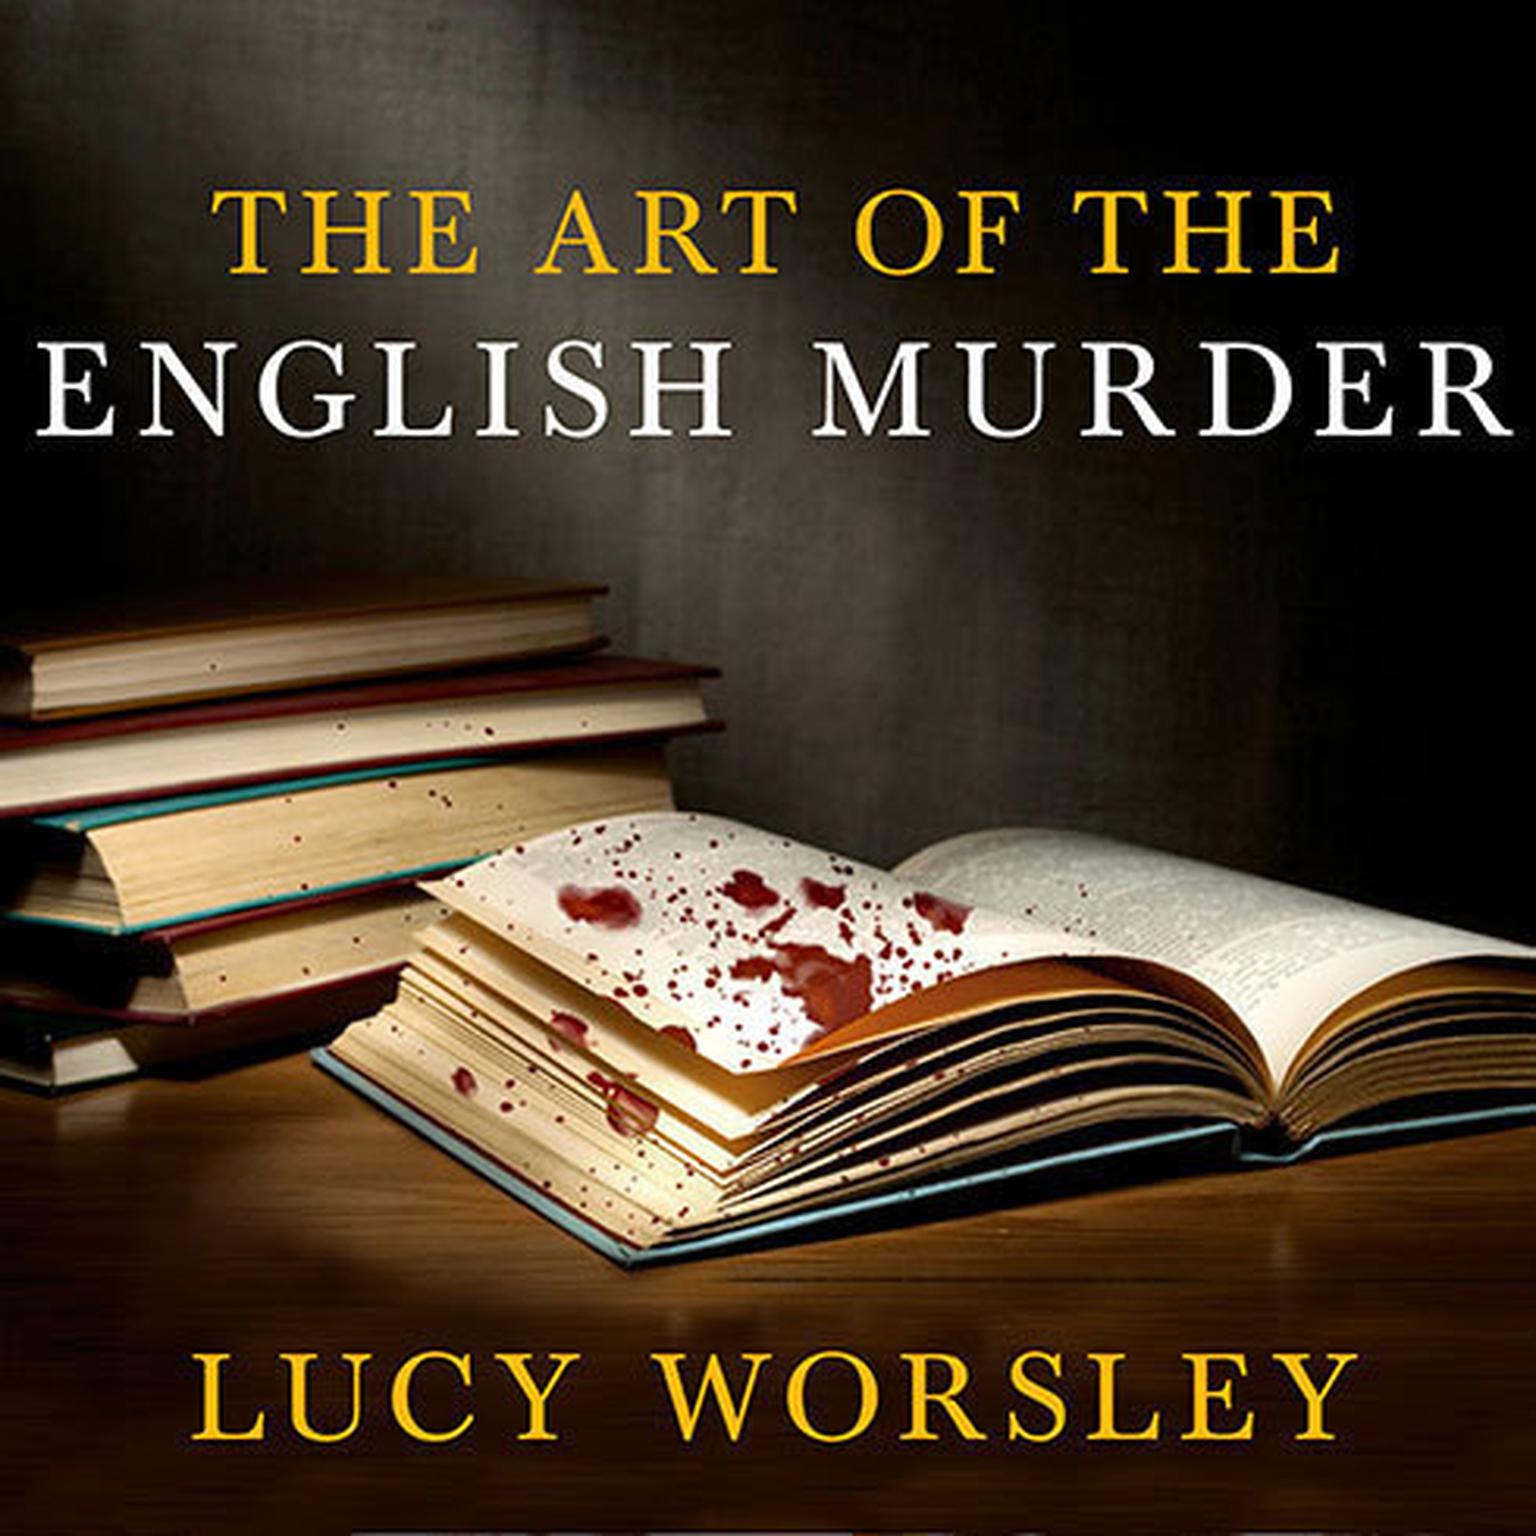 The Art of the English Murder: From Jack the Ripper and Sherlock Holmes to Agatha Christie and Alfred Hitchcock Audiobook, by Lucy Worsley